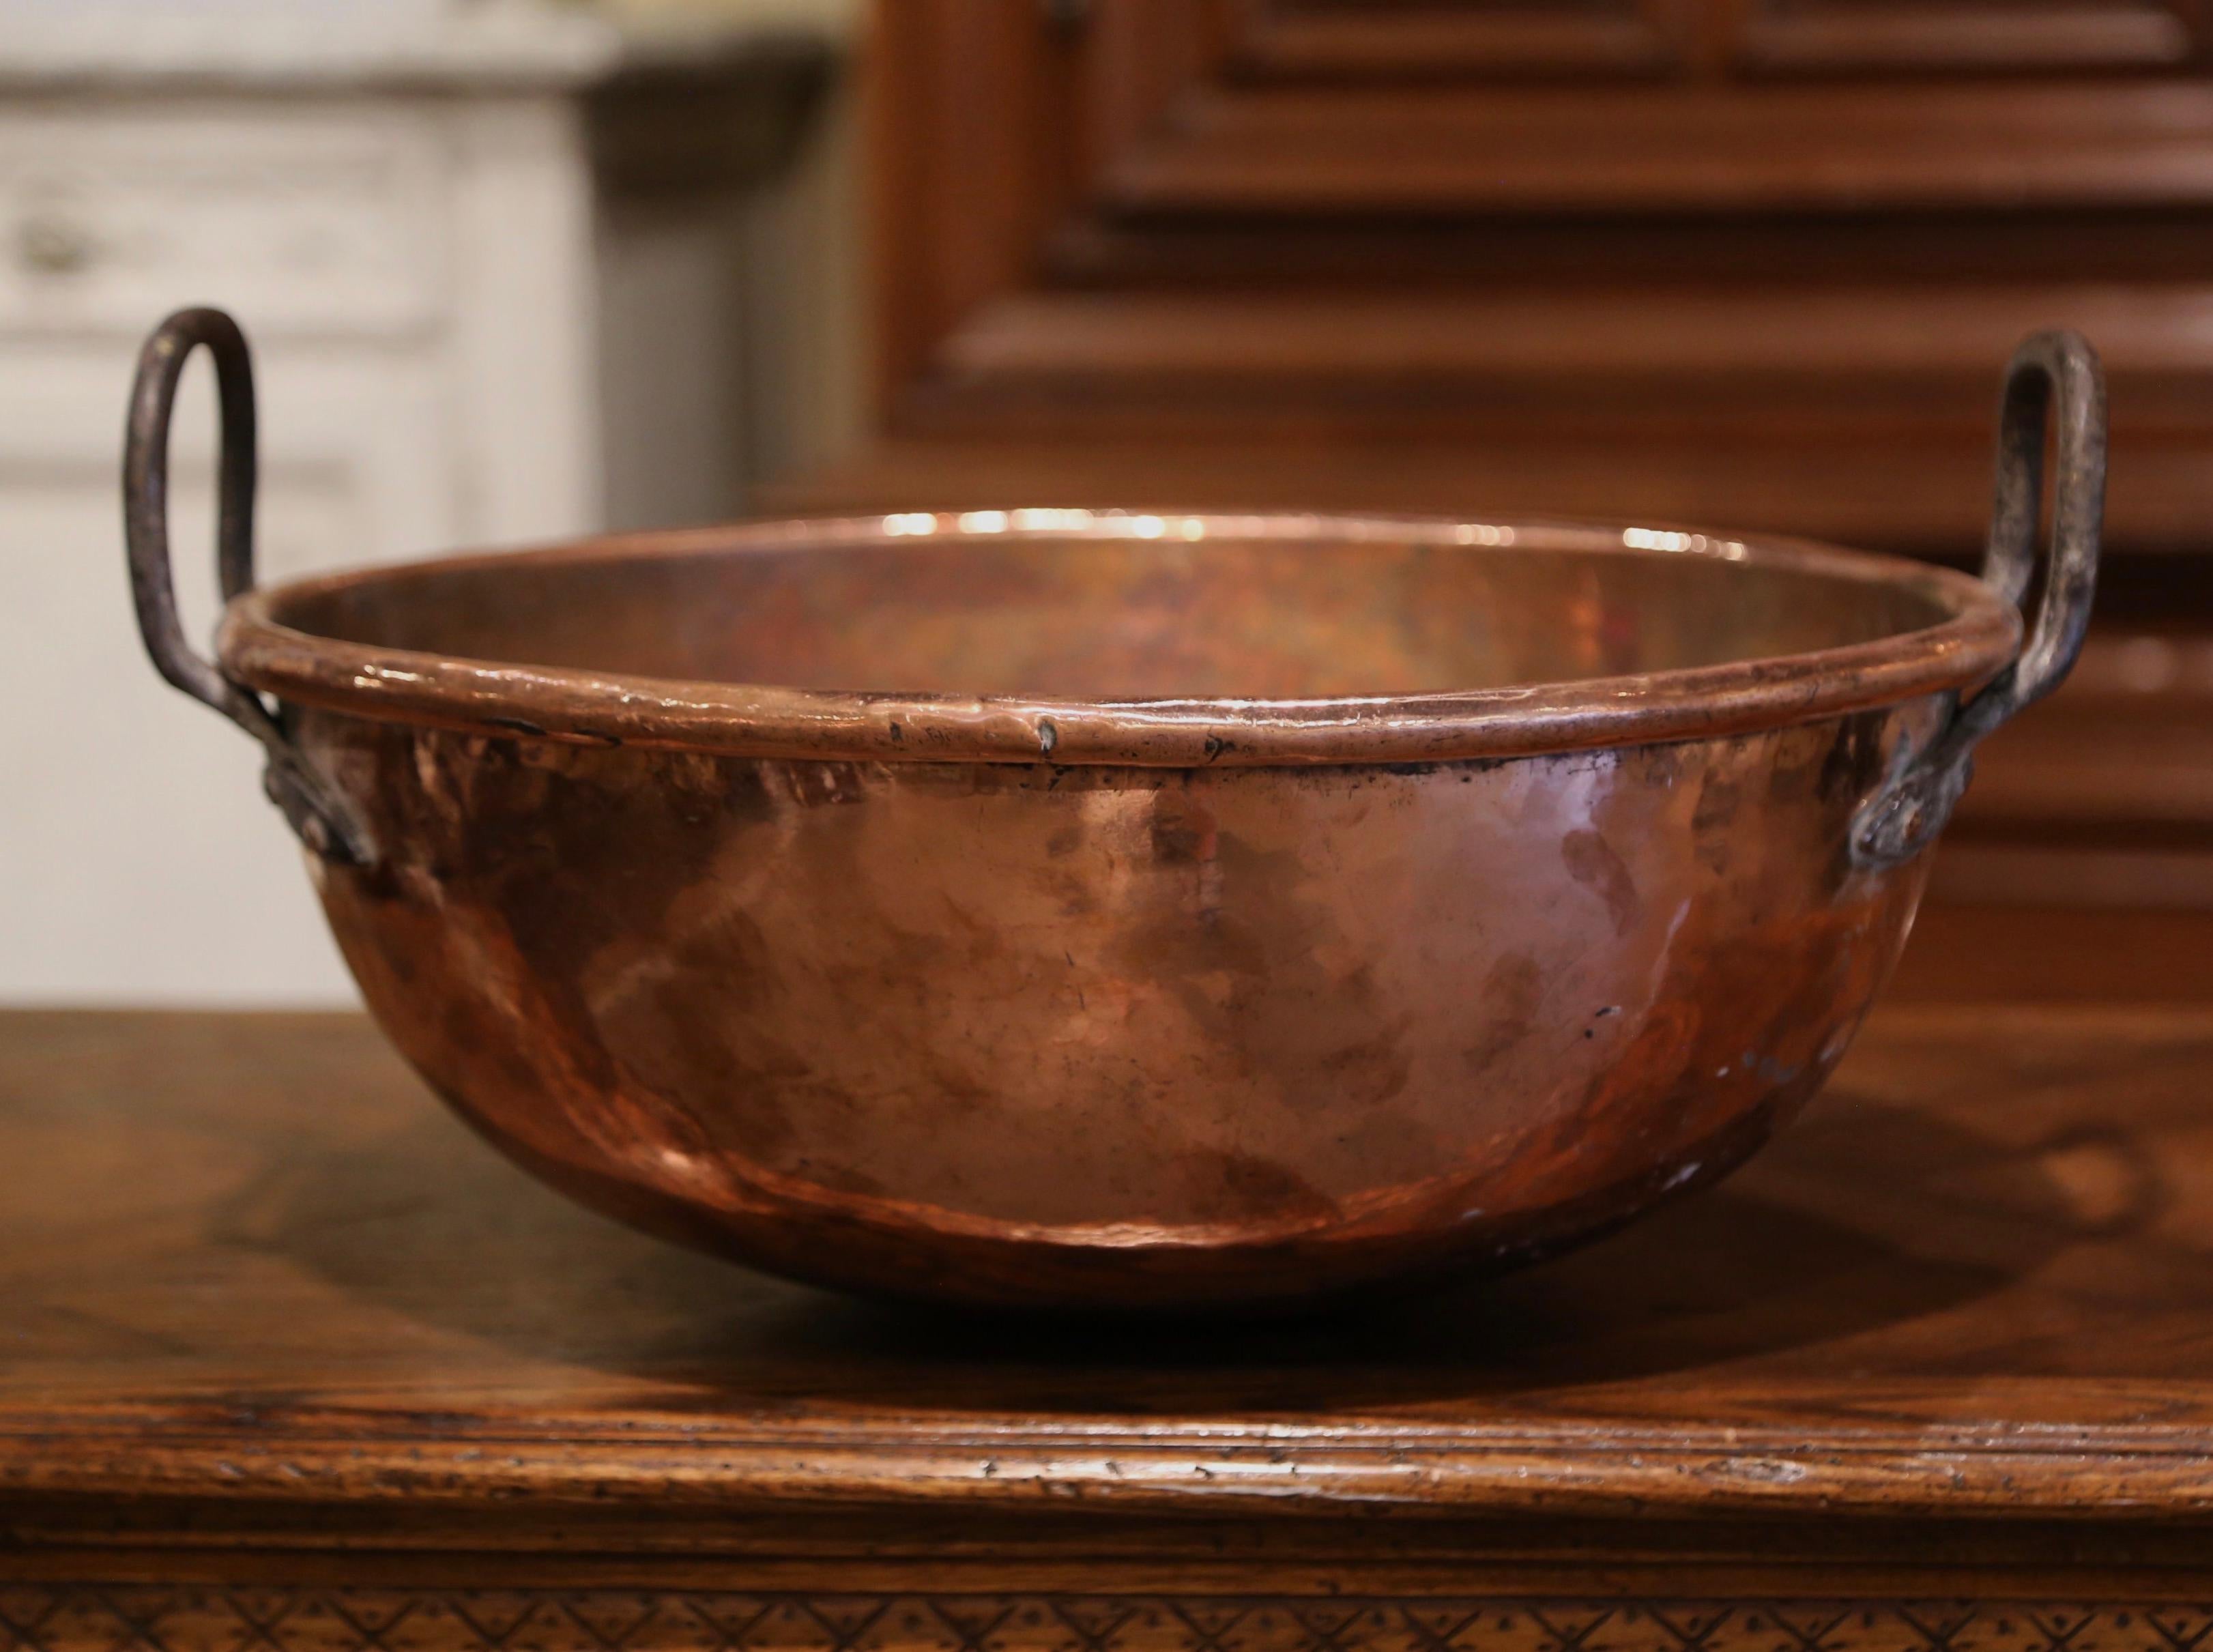 Bring an authentic French countryside touch to your kitchen with this large antique copper marmalade bowl. Crafted in Normandy, France, circa 1780, the decorative “Bassine a Confiture” (or jelly bowl) is round in shape and dressed with two forged